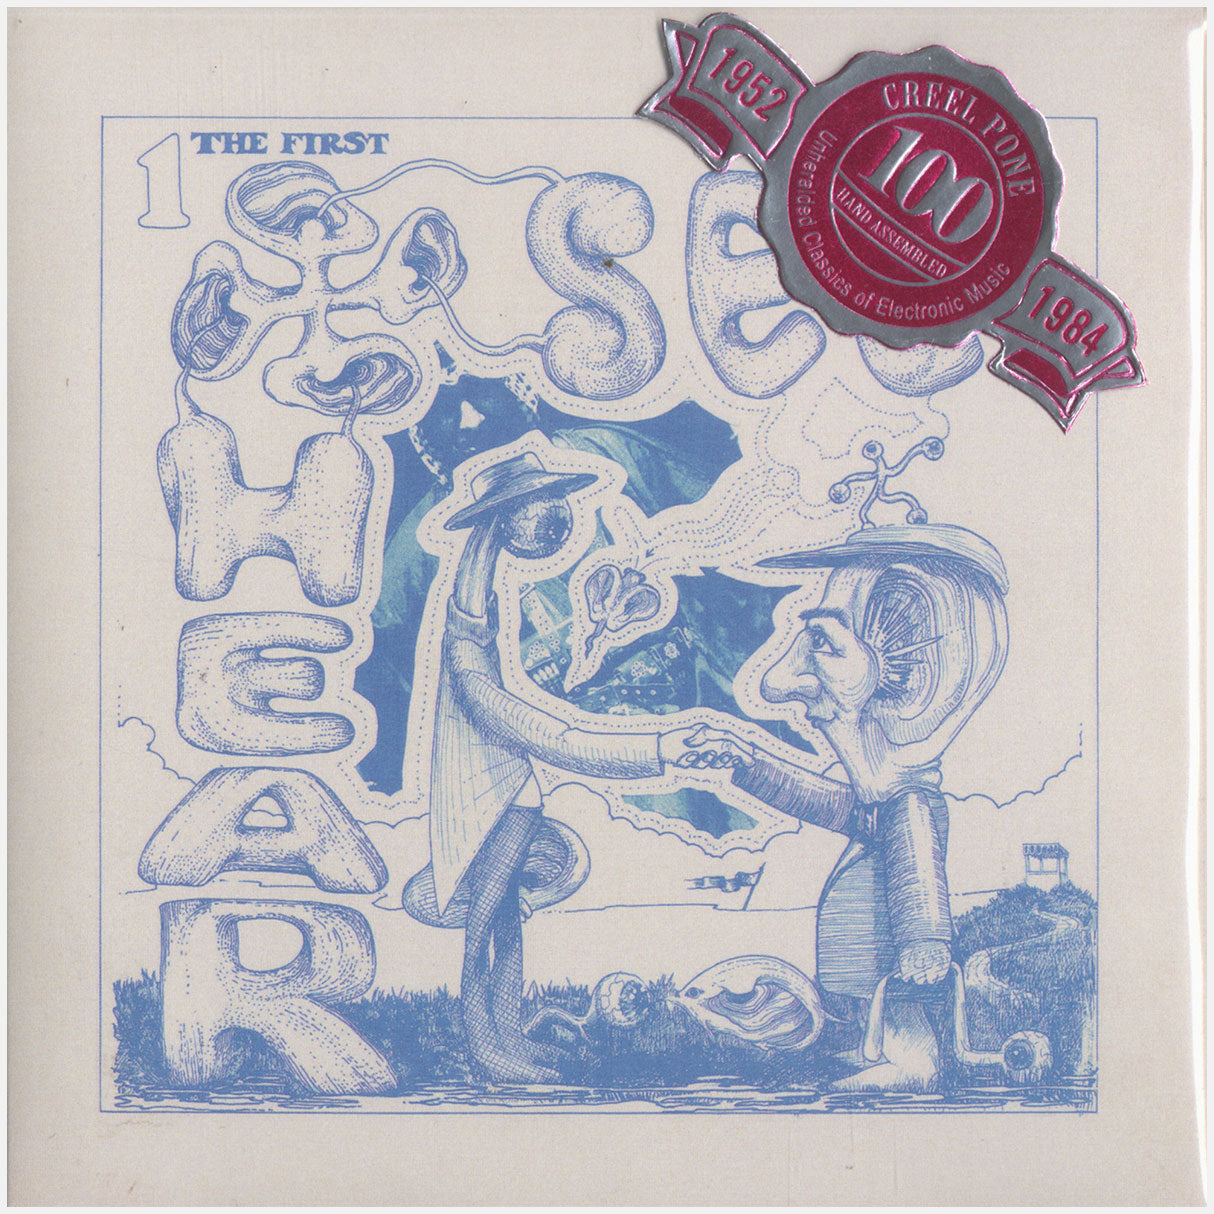 [CP 201 CD] Jim Brown, Wayne Carr, Ross Barrett, et al.; The First See + Hear, Oh See Can You Say